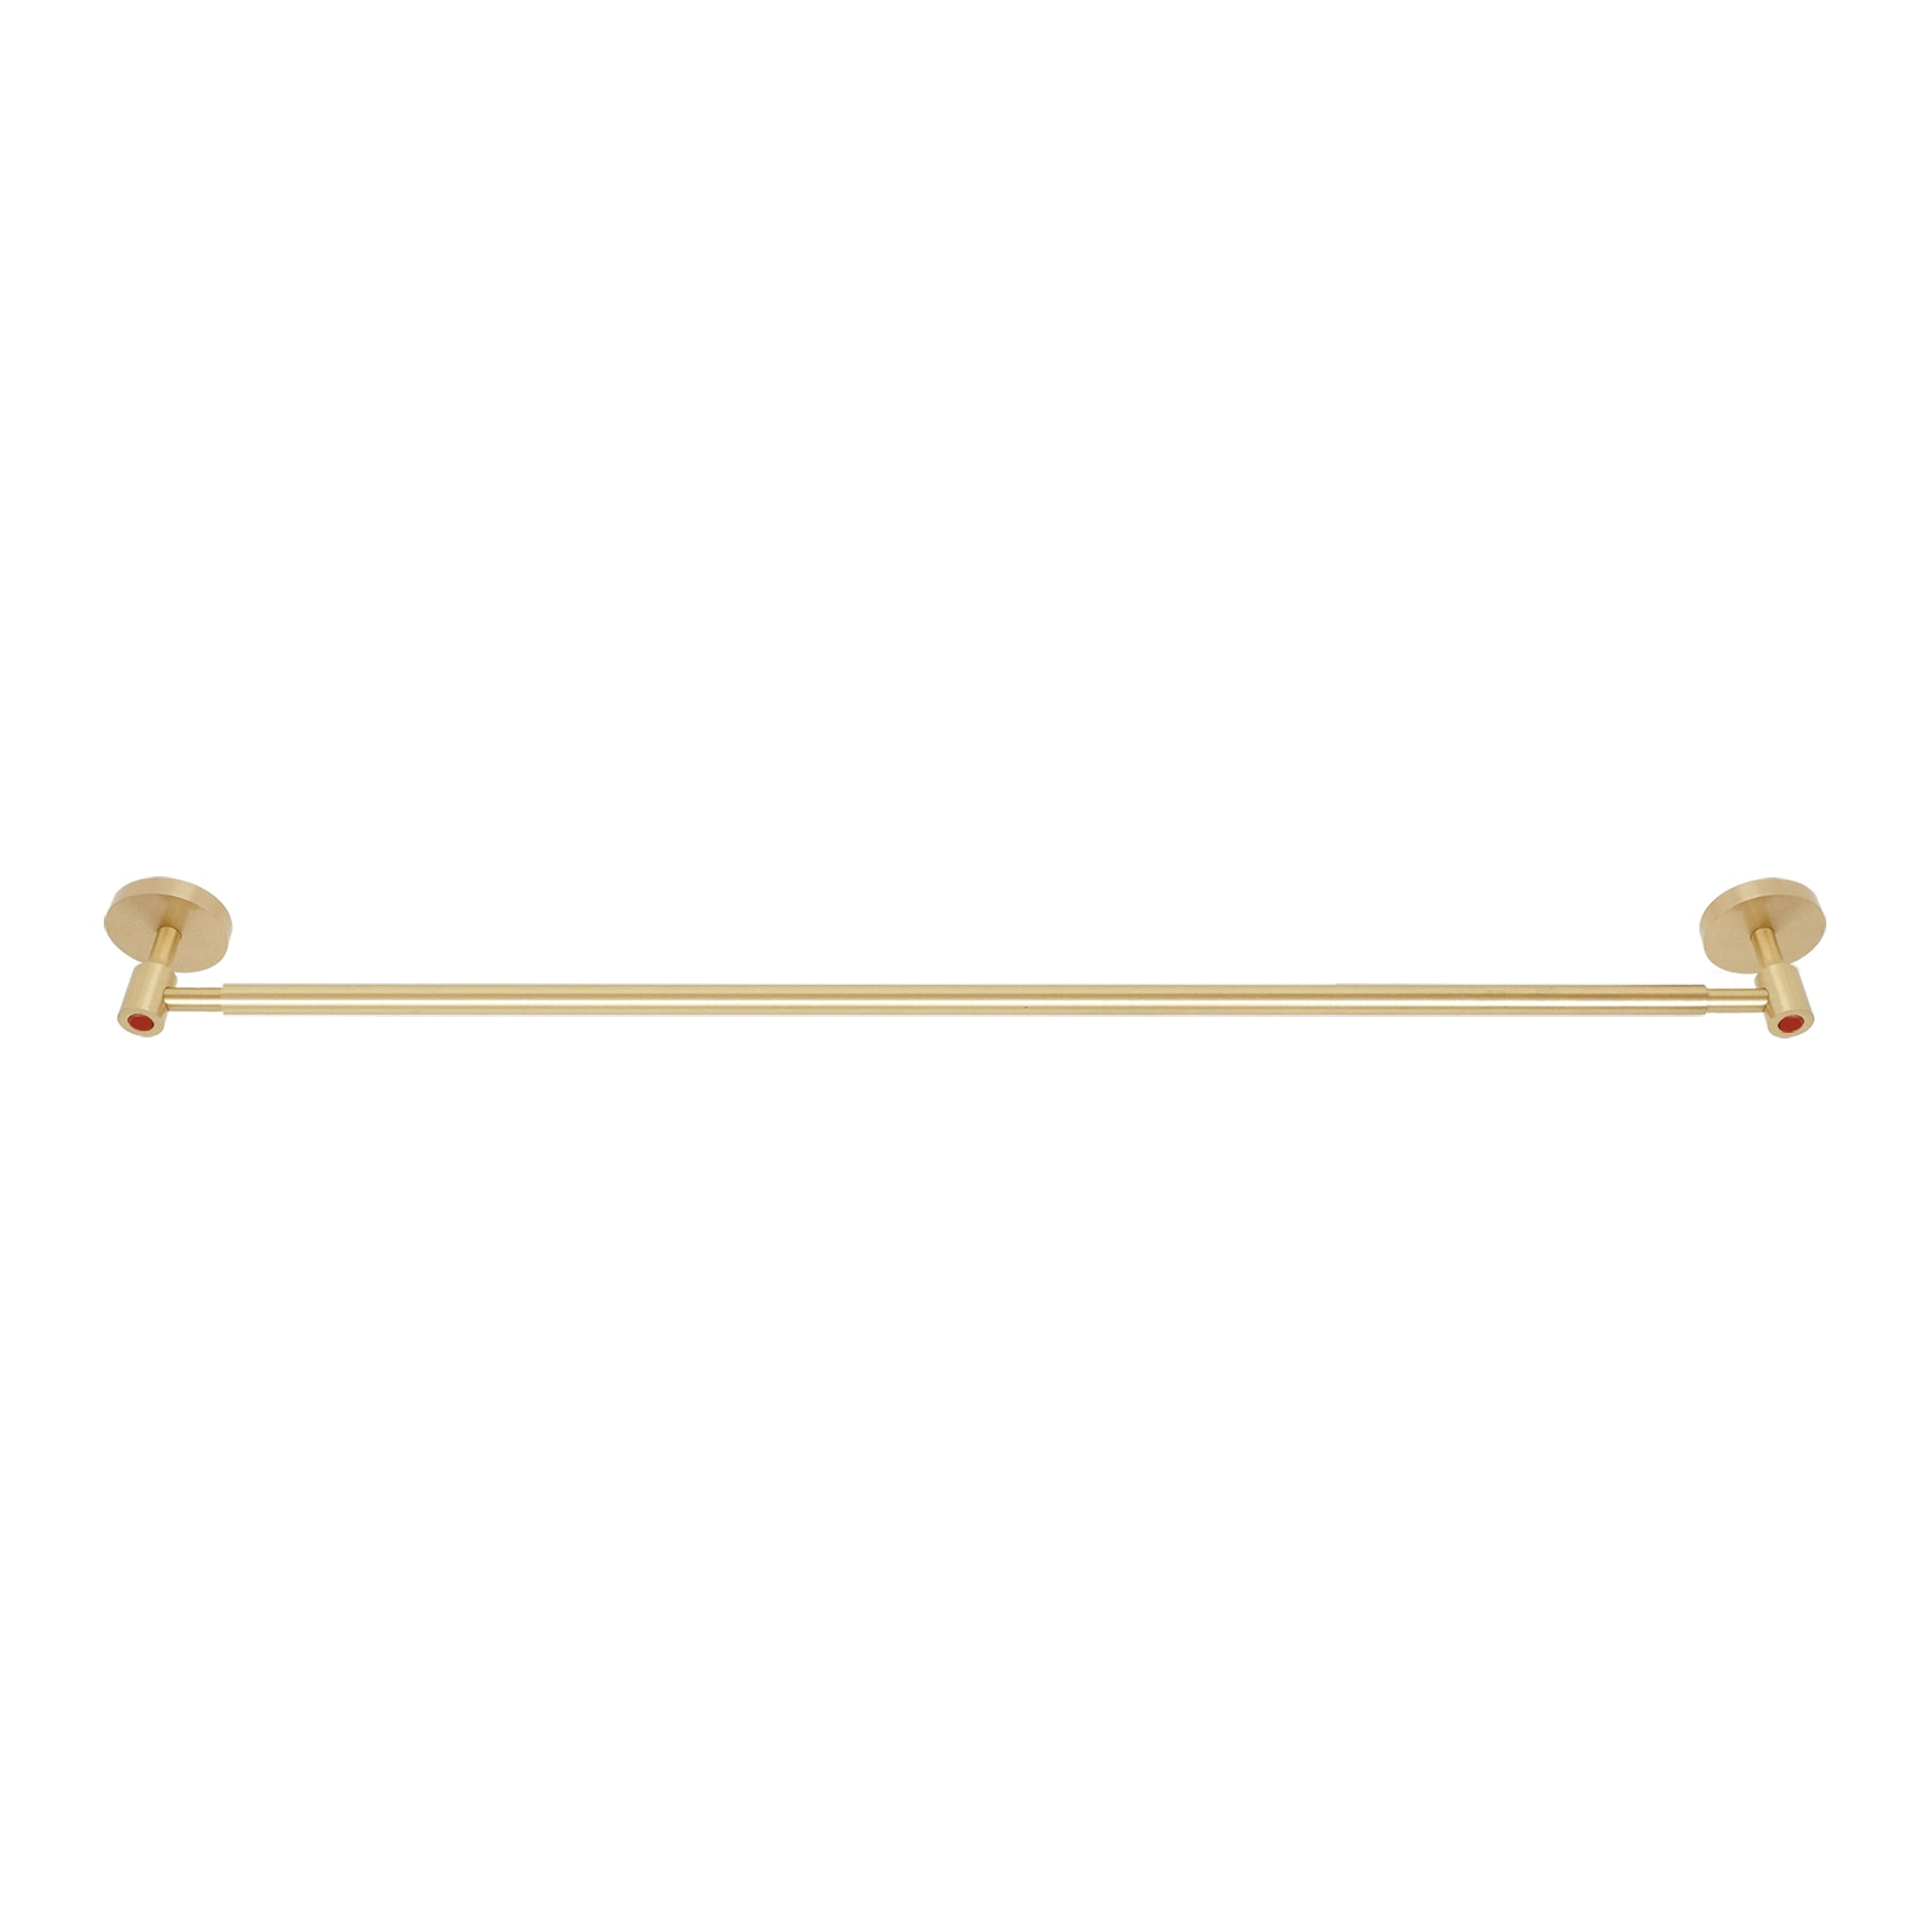 Brass and riding hood red color Head towel bar 24" Dutton Brown hardware